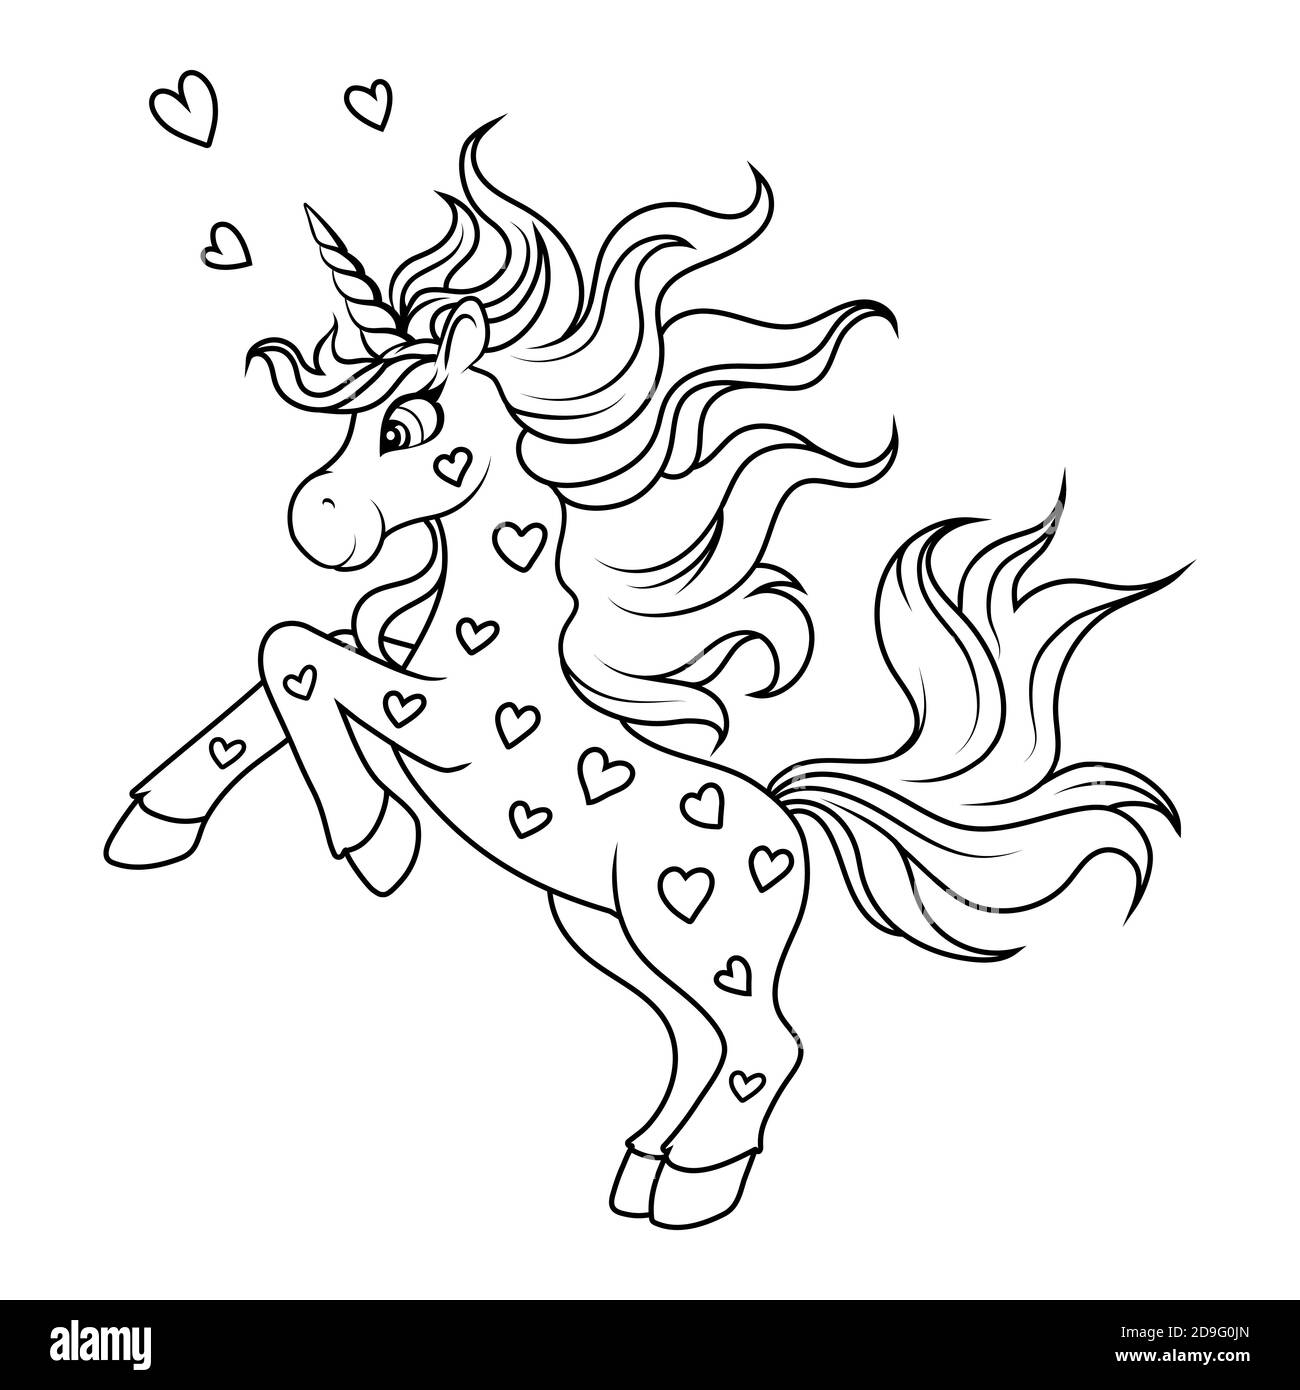 Cute magical unicorn with hearts. Coloring picture Stock Vector ...